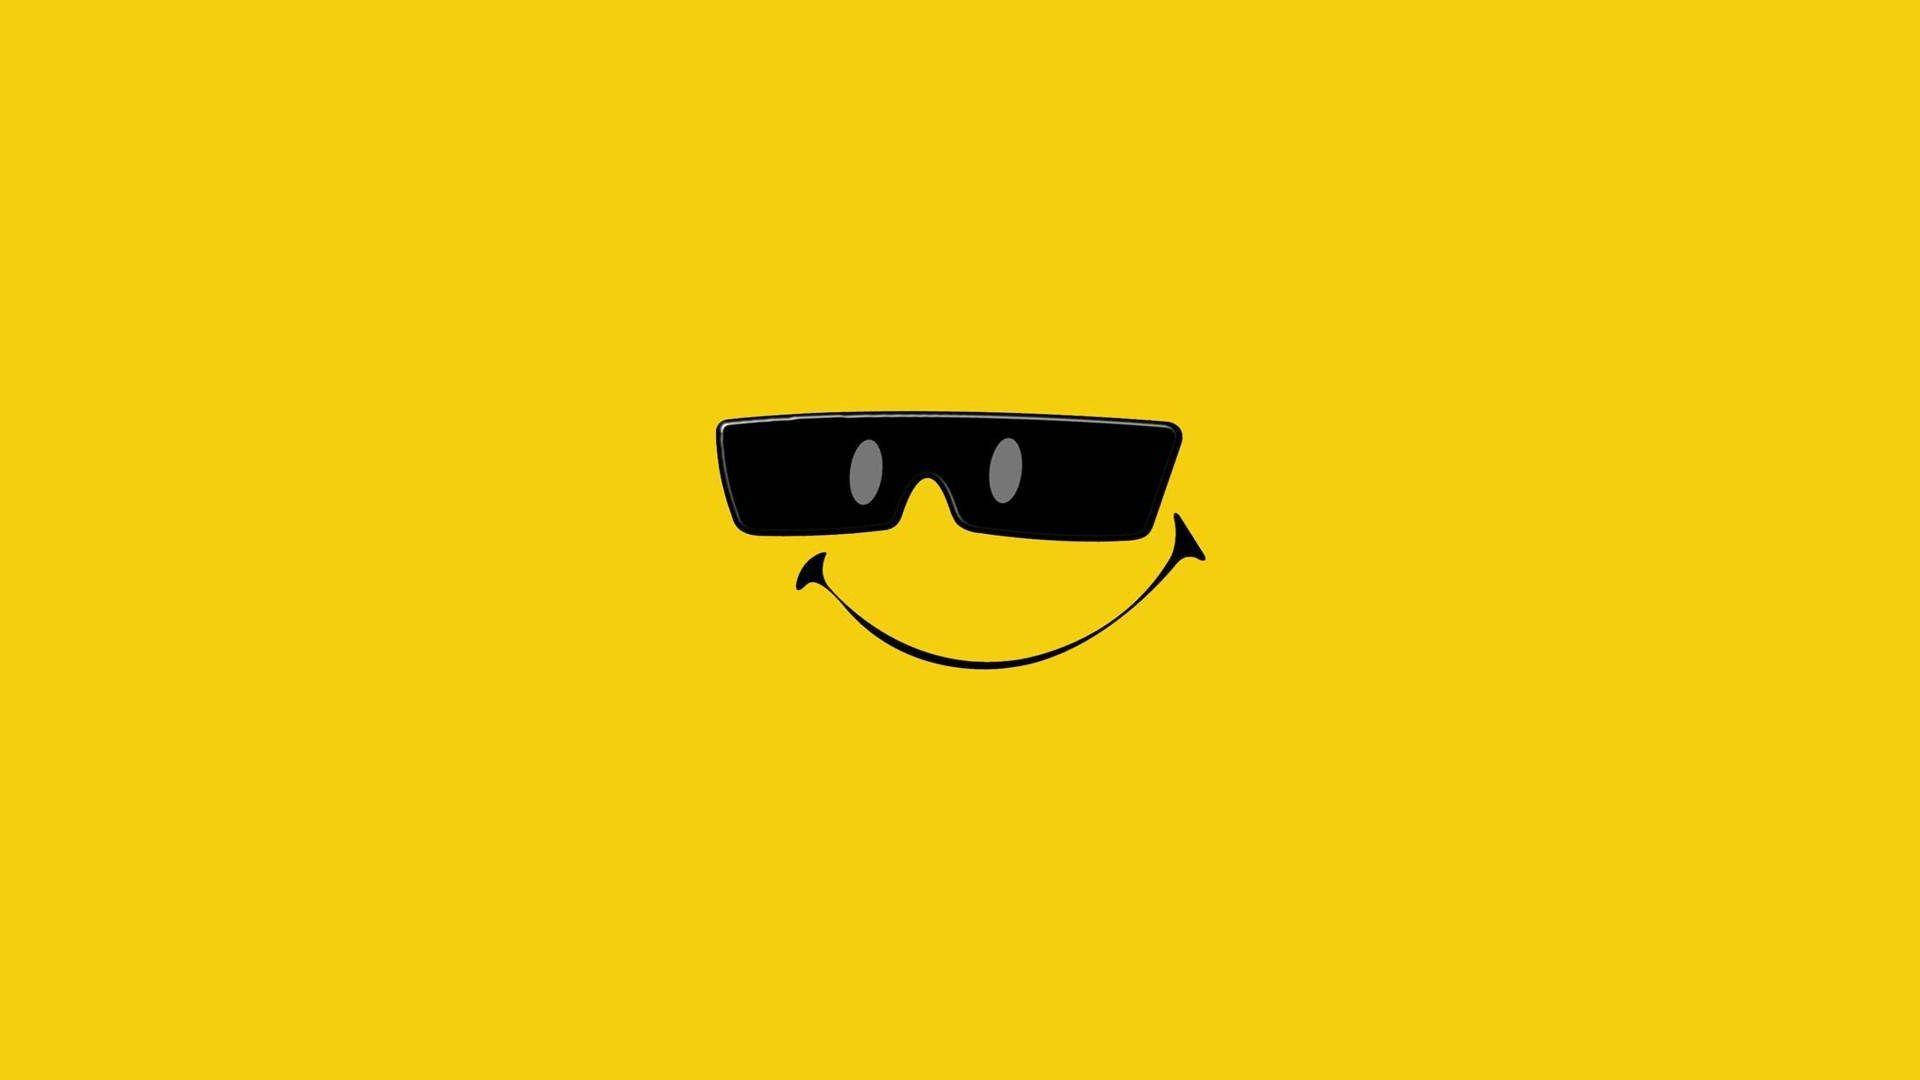 Cool Smiley In Sunnies Wallpaper